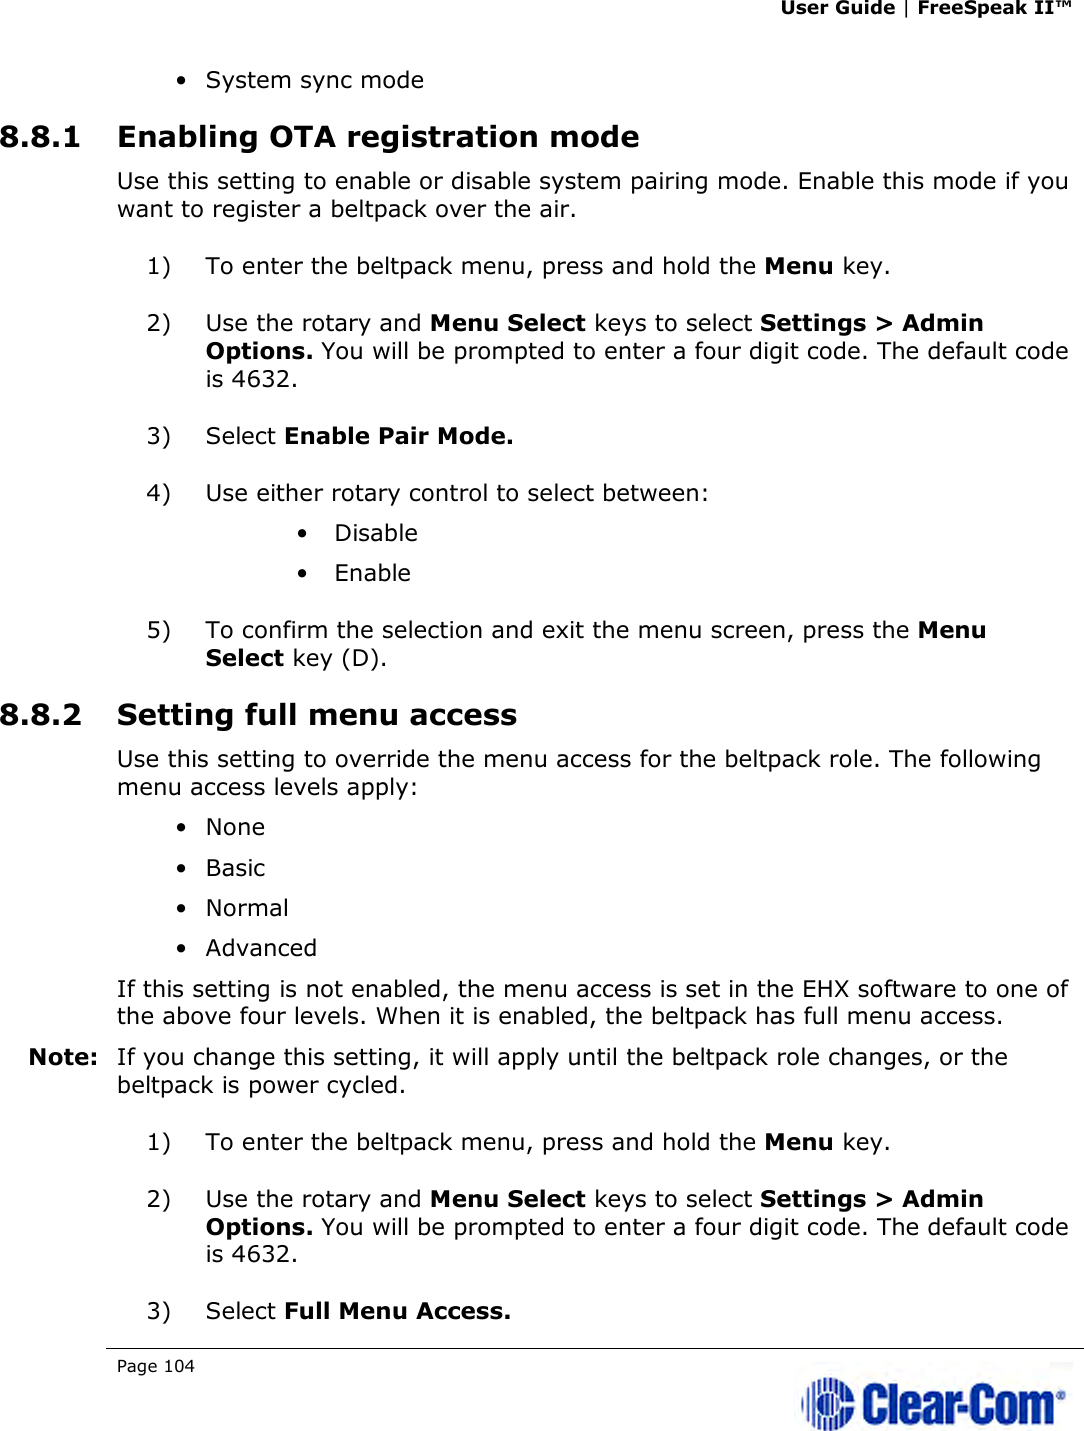 User Guide | FreeSpeak II™  Page 104   • System sync mode 8.8.1 Enabling OTA registration mode Use this setting to enable or disable system pairing mode. Enable this mode if you want to register a beltpack over the air. 1) To enter the beltpack menu, press and hold the Menu key. 2) Use the rotary and Menu Select keys to select Settings &gt; Admin Options. You will be prompted to enter a four digit code. The default code is 4632. 3) Select Enable Pair Mode.  4) Use either rotary control to select between: • Disable • Enable 5) To confirm the selection and exit the menu screen, press the Menu Select key (D). 8.8.2 Setting full menu access Use this setting to override the menu access for the beltpack role. The following menu access levels apply: • None • Basic • Normal • Advanced If this setting is not enabled, the menu access is set in the EHX software to one of the above four levels. When it is enabled, the beltpack has full menu access. Note: If you change this setting, it will apply until the beltpack role changes, or the beltpack is power cycled. 1) To enter the beltpack menu, press and hold the Menu key. 2) Use the rotary and Menu Select keys to select Settings &gt; Admin Options. You will be prompted to enter a four digit code. The default code is 4632. 3) Select Full Menu Access.  